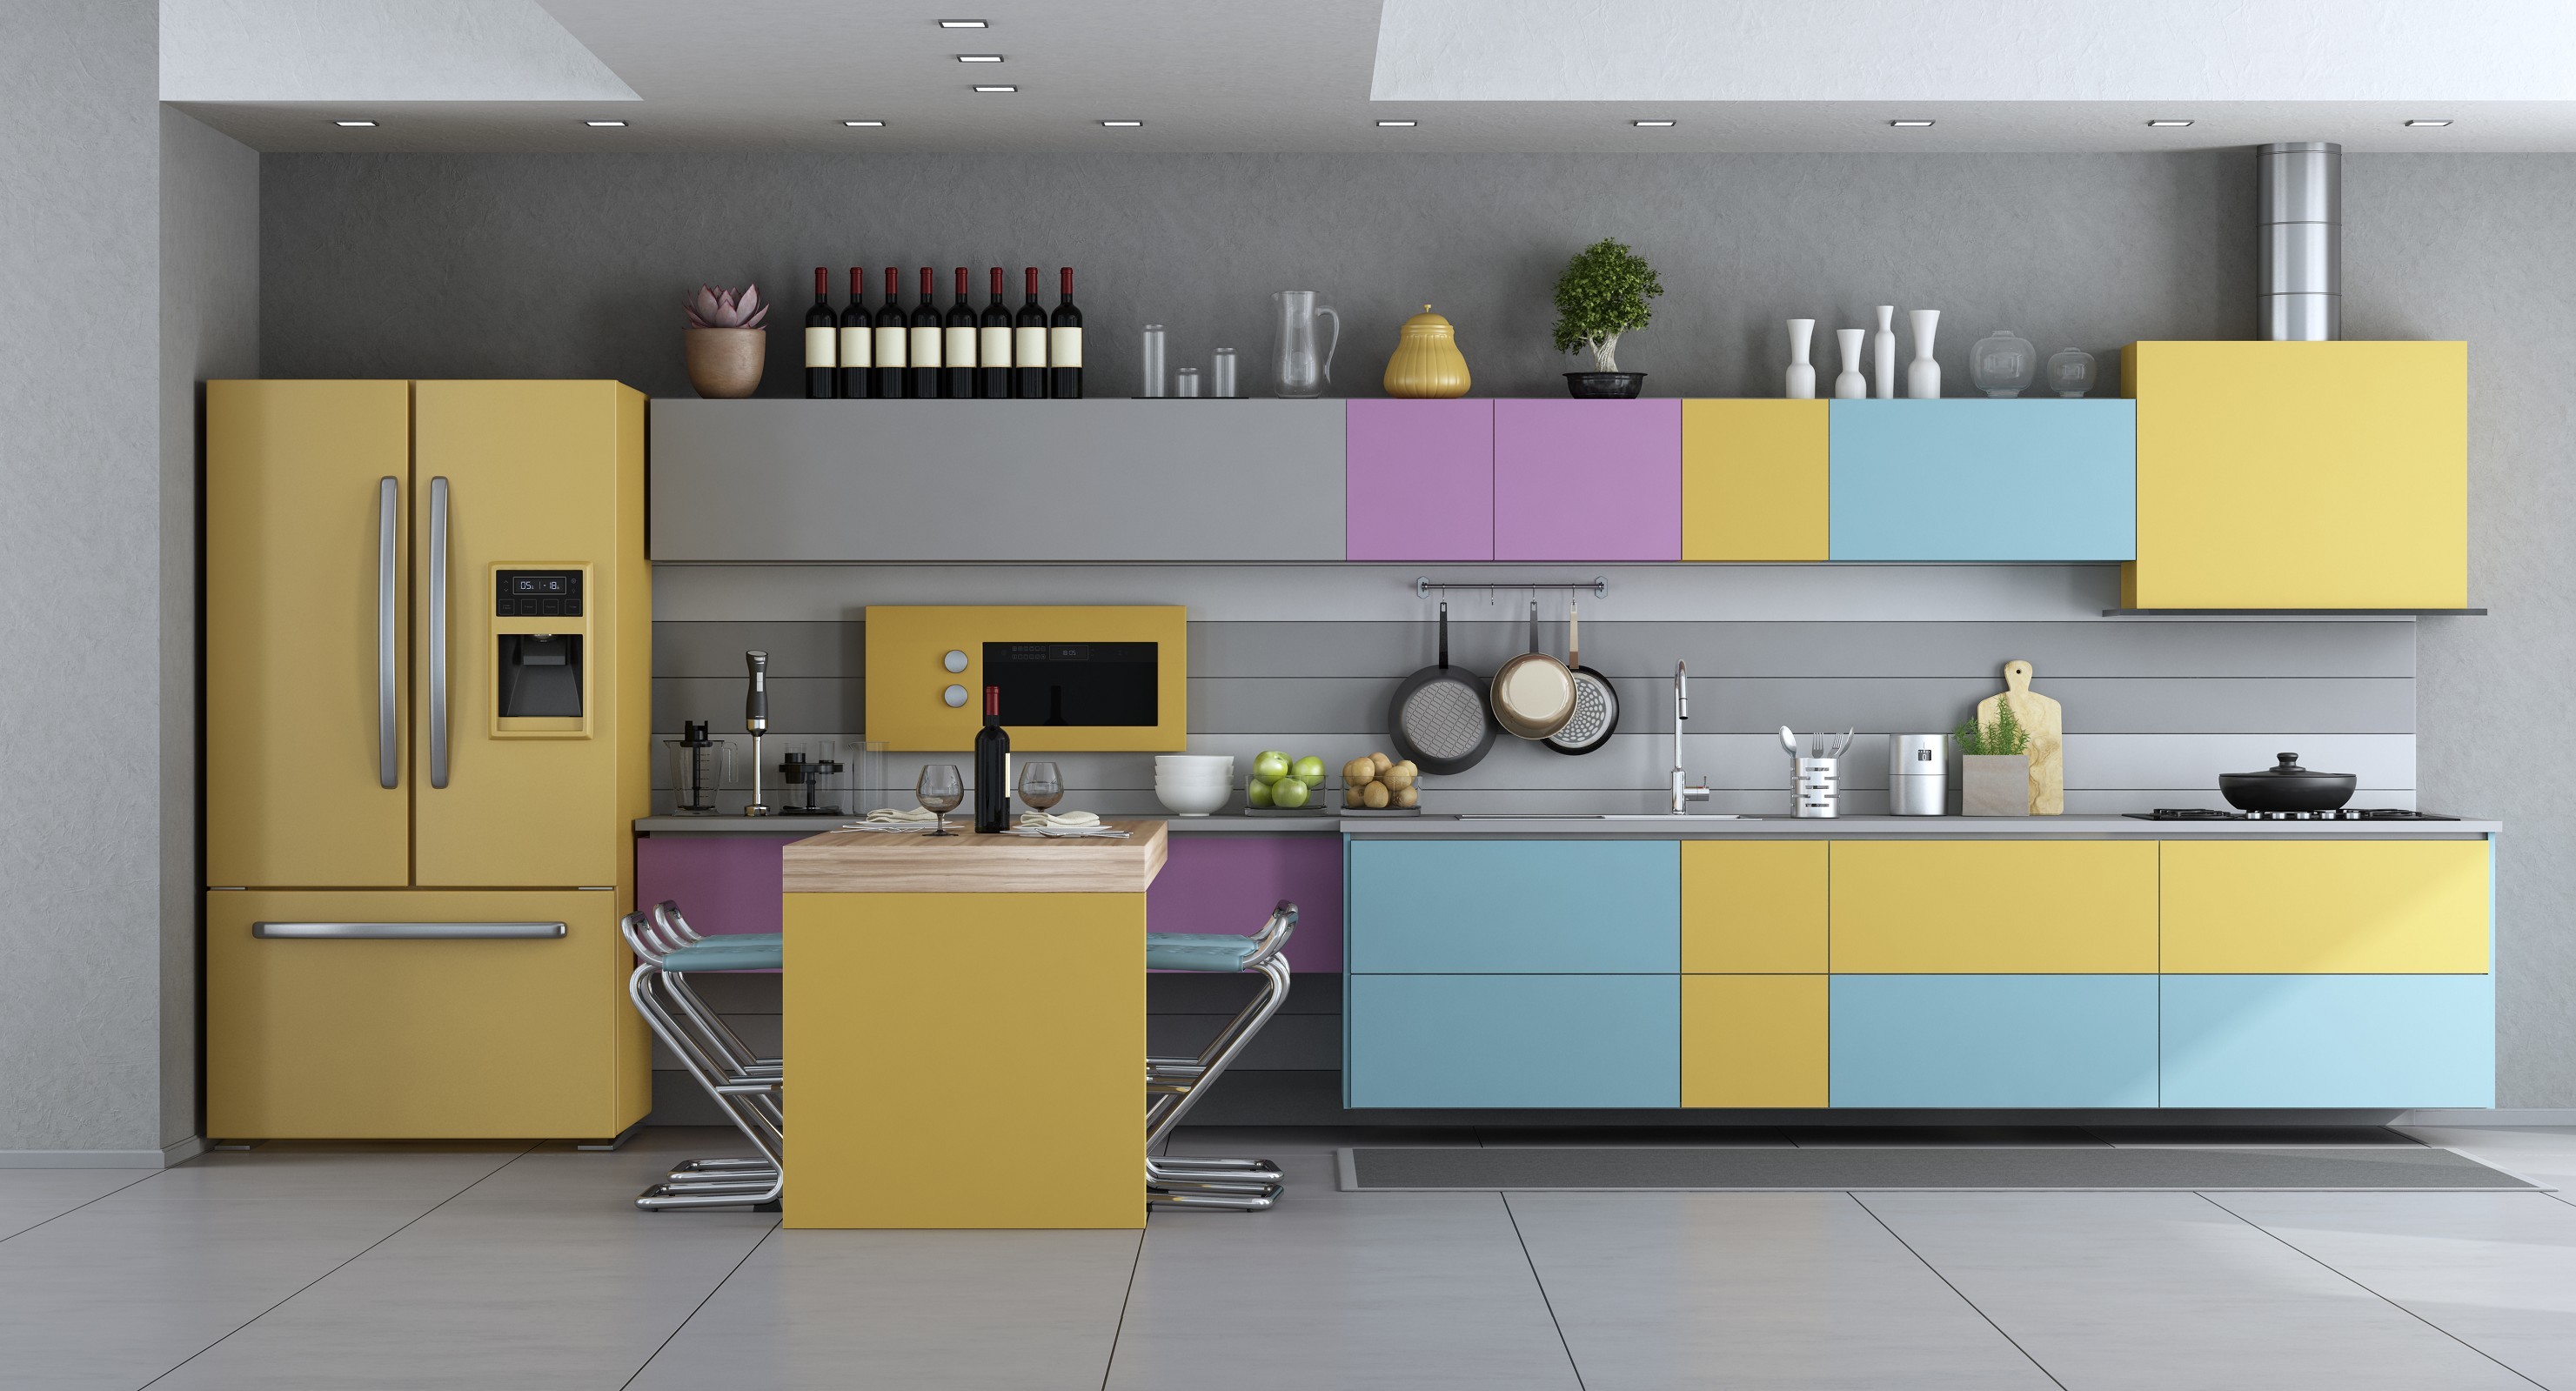 Kitchens designed in a designer style with an island